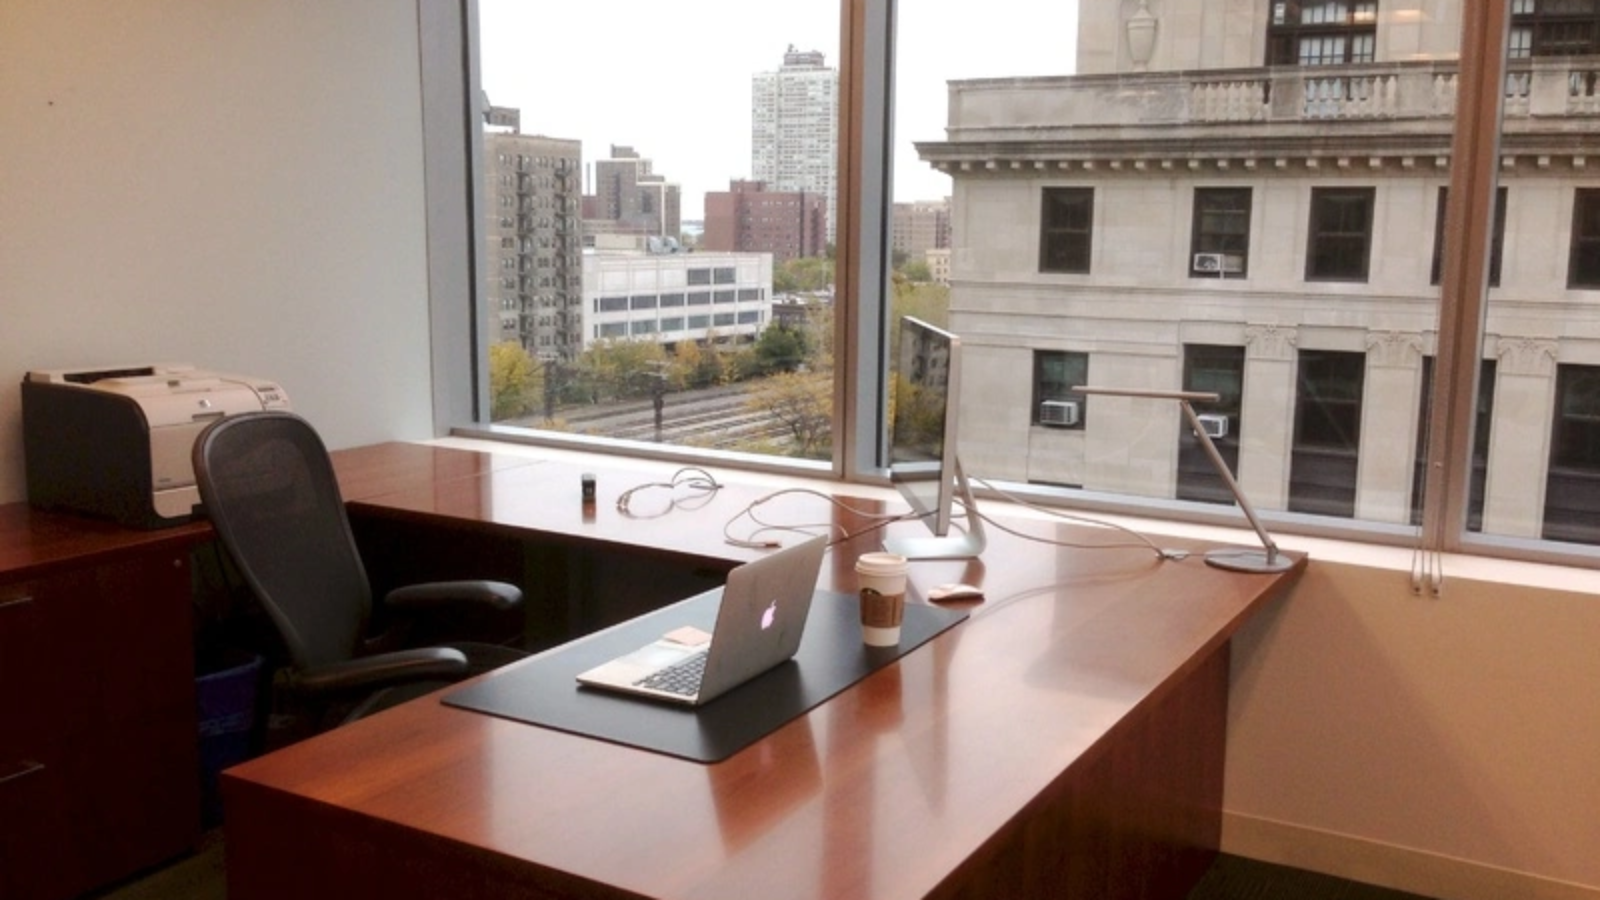 Office Desk with Laptop and Coffee Cup with Cityscape View